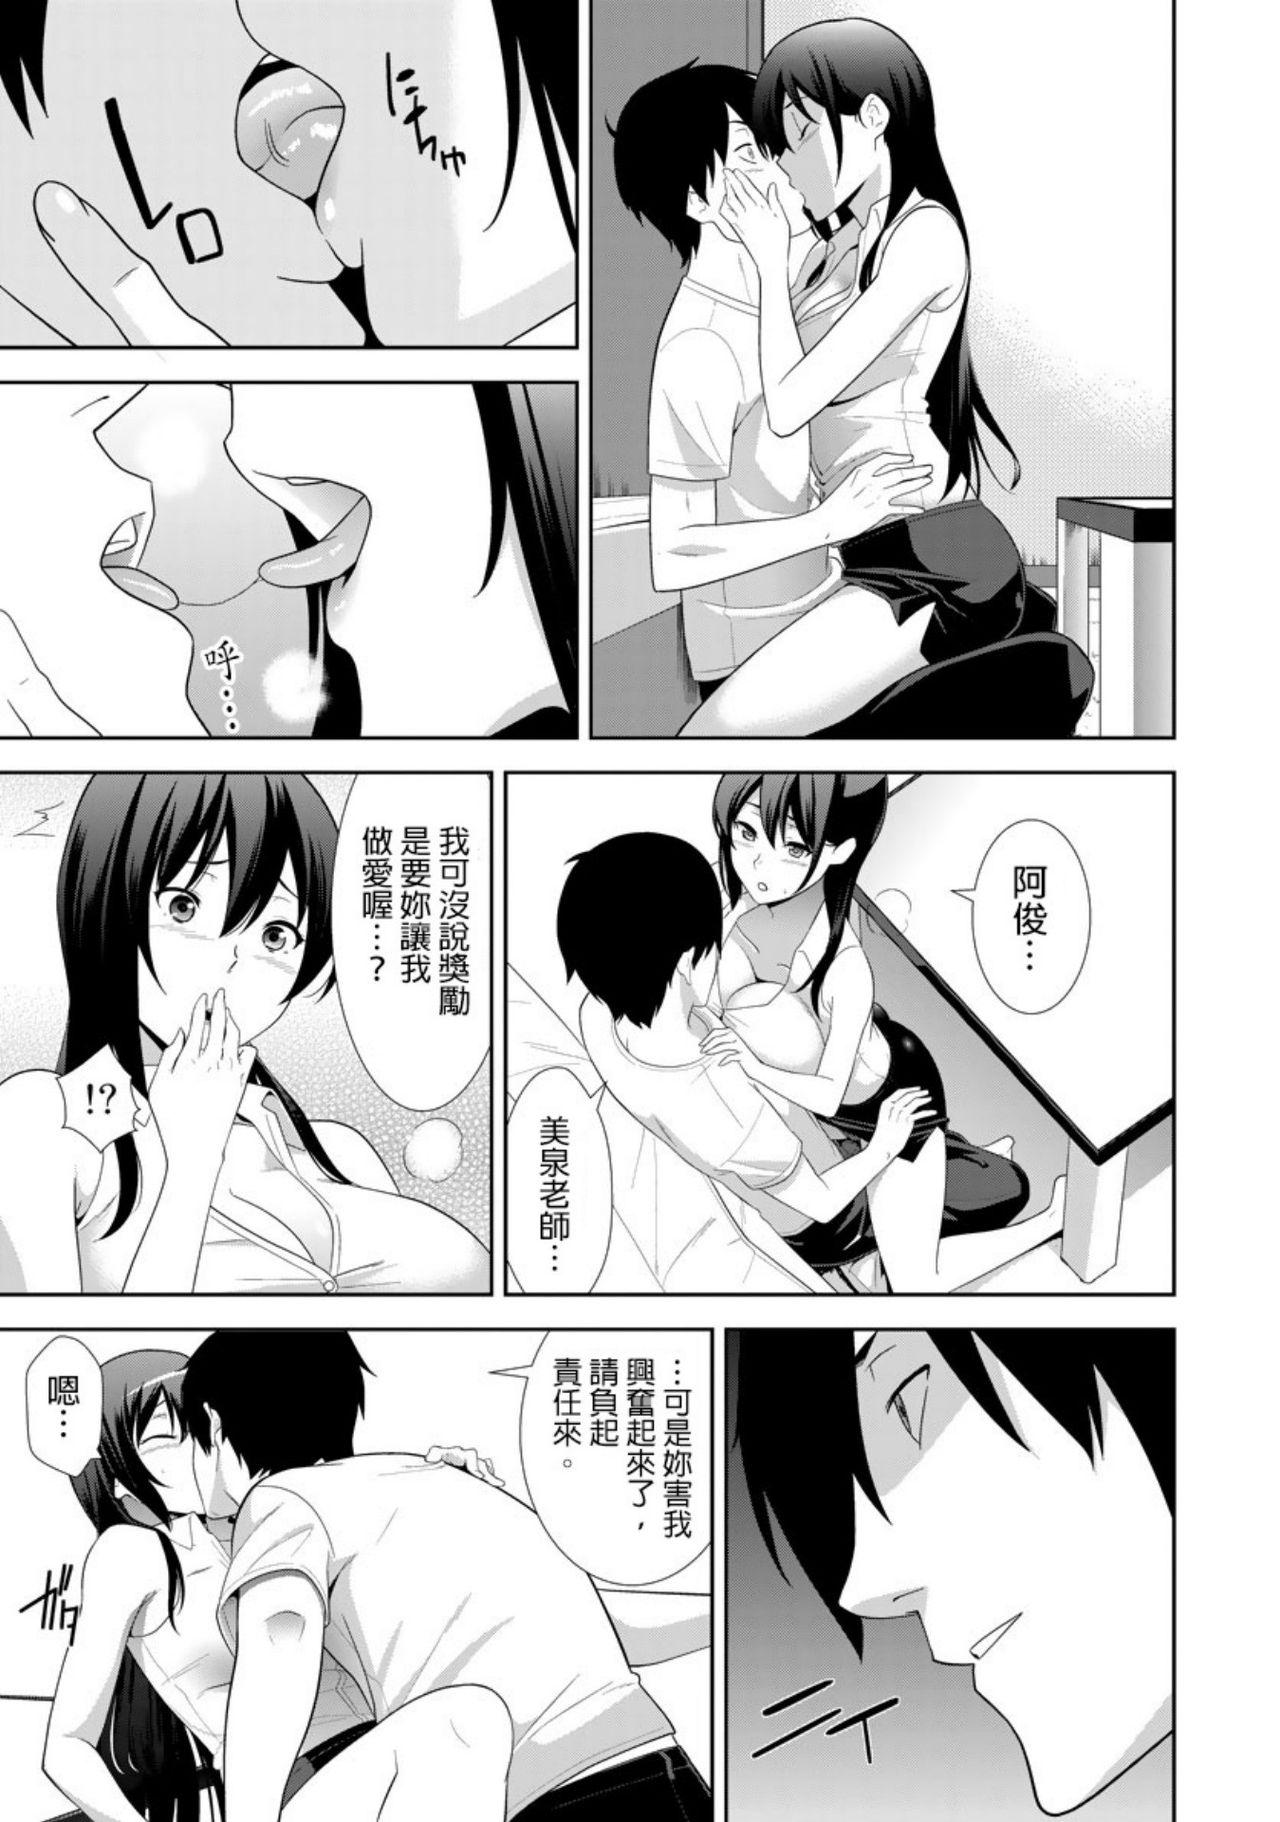 Teasing 教え子に襲ワレル人妻は抵抗できなくて Ch.4 Reversecowgirl - Page 8